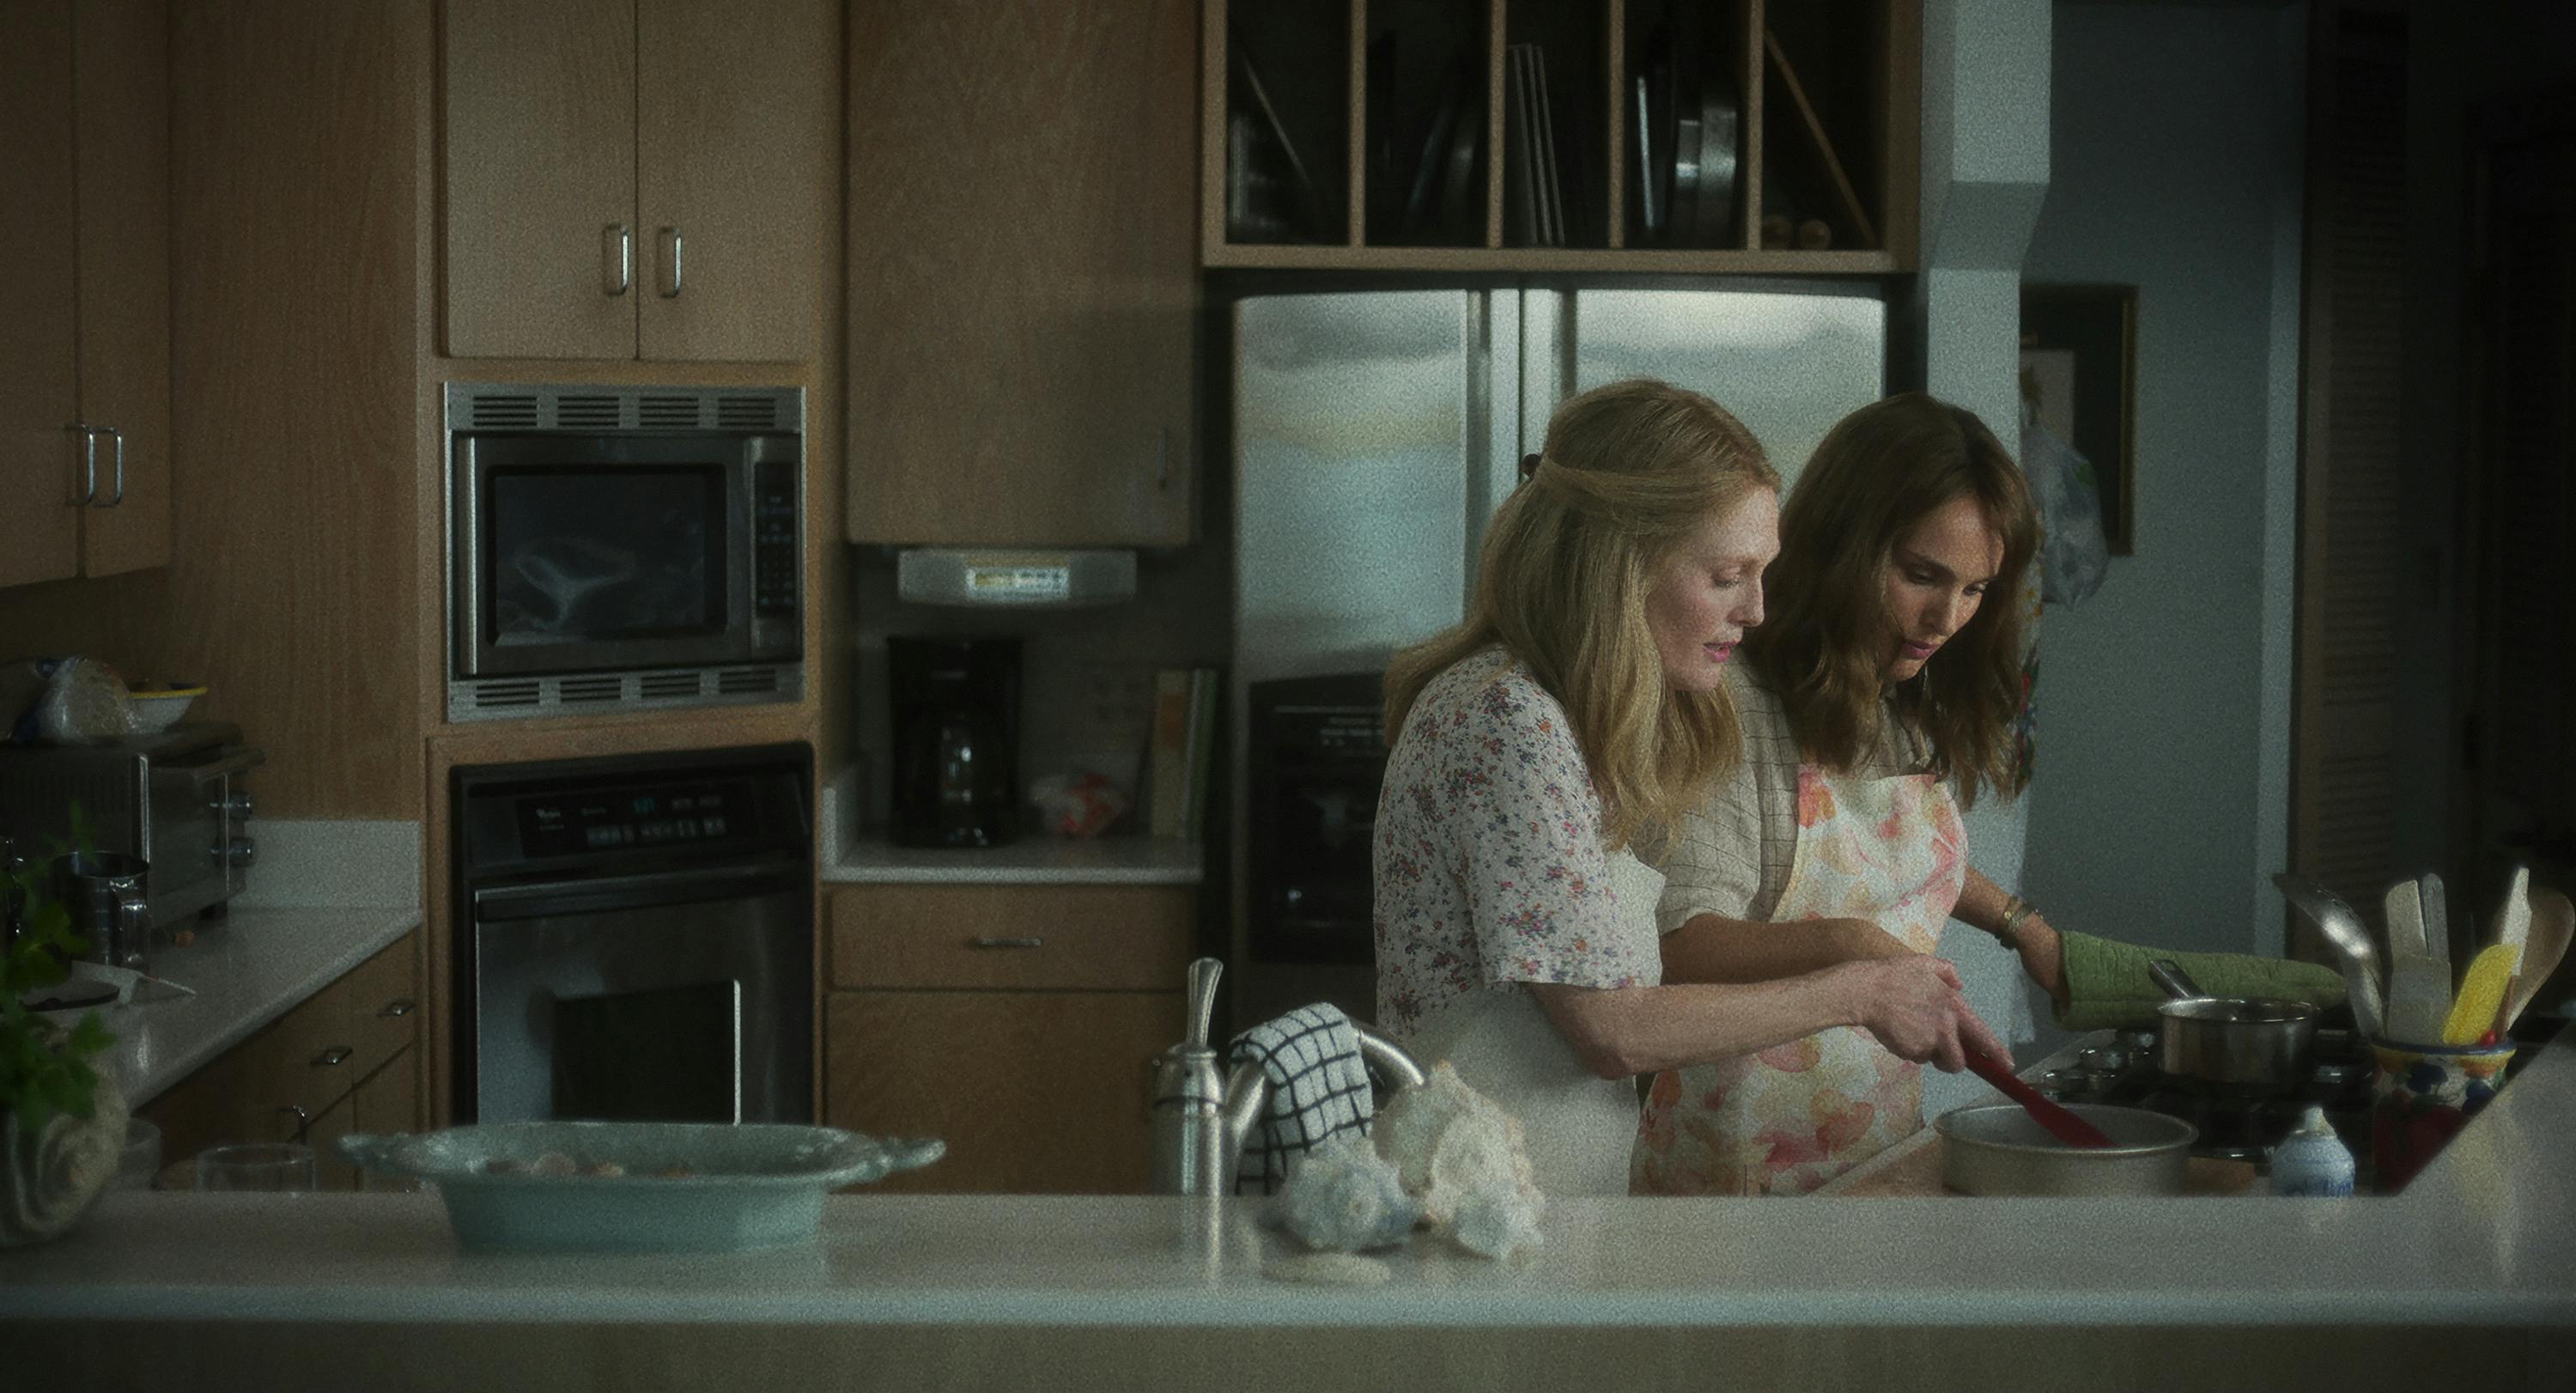 Gracie Atherton-Yoo (Julianne Moore) shows Elizabeth Berry (Natalie Portman) how to bake a cake. Both women wear floral and aprons.